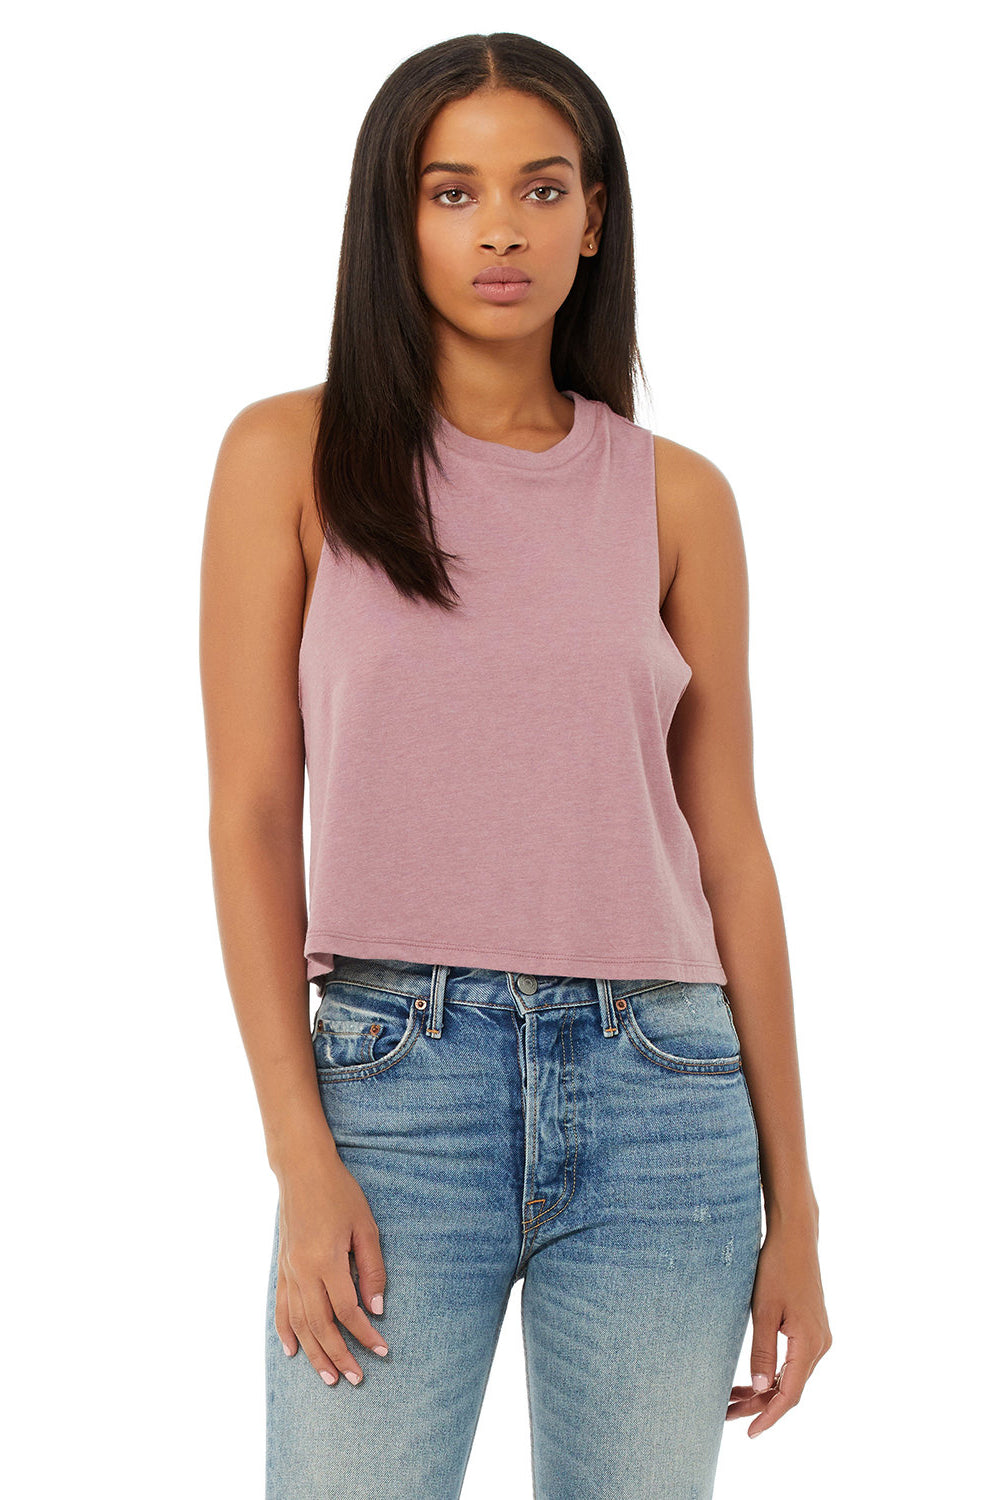 Bella + Canvas BC6682/6682 Womens Cropped Tank Top Heather Orchid Model Front